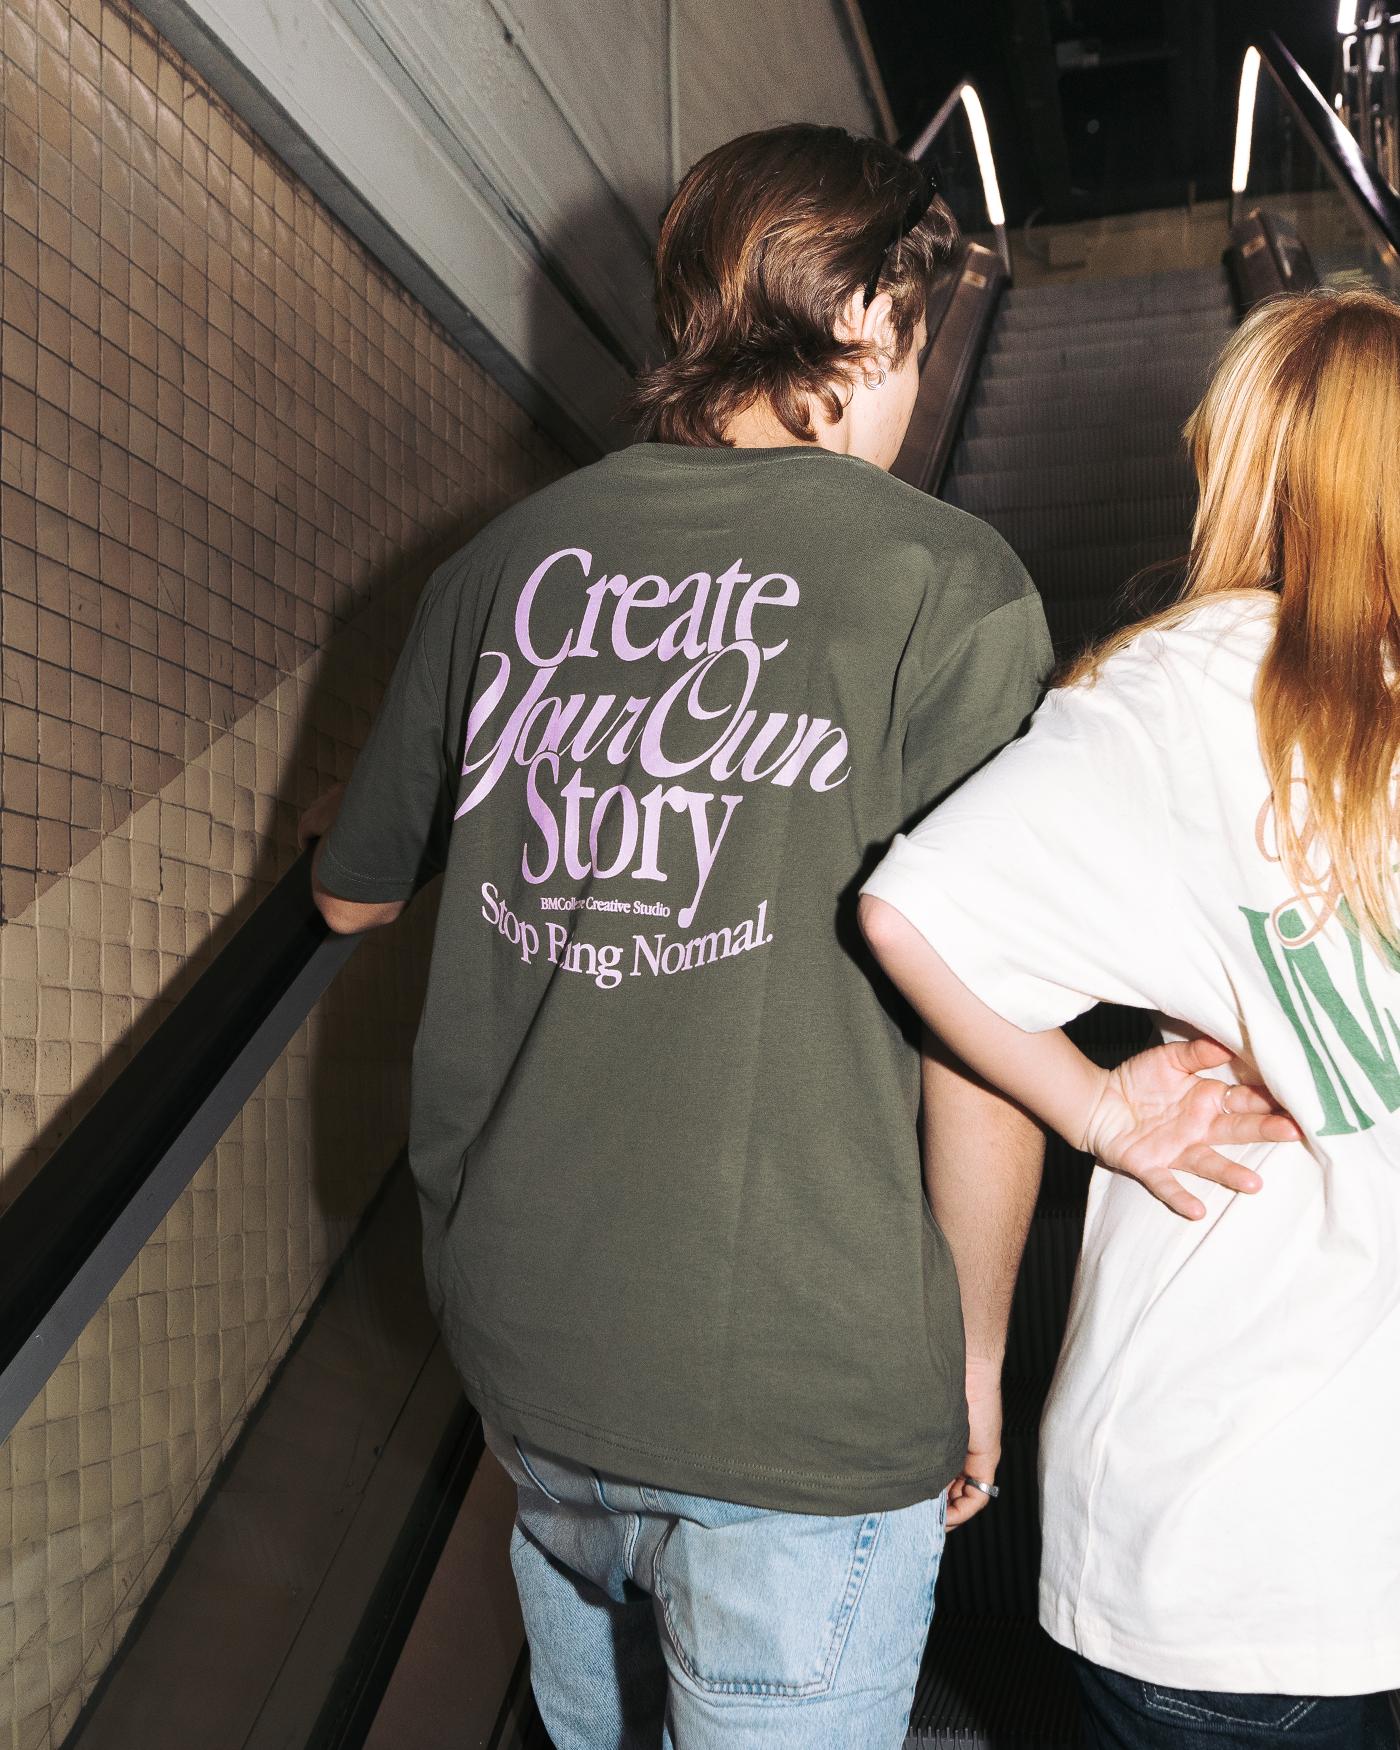 Own Story Tee